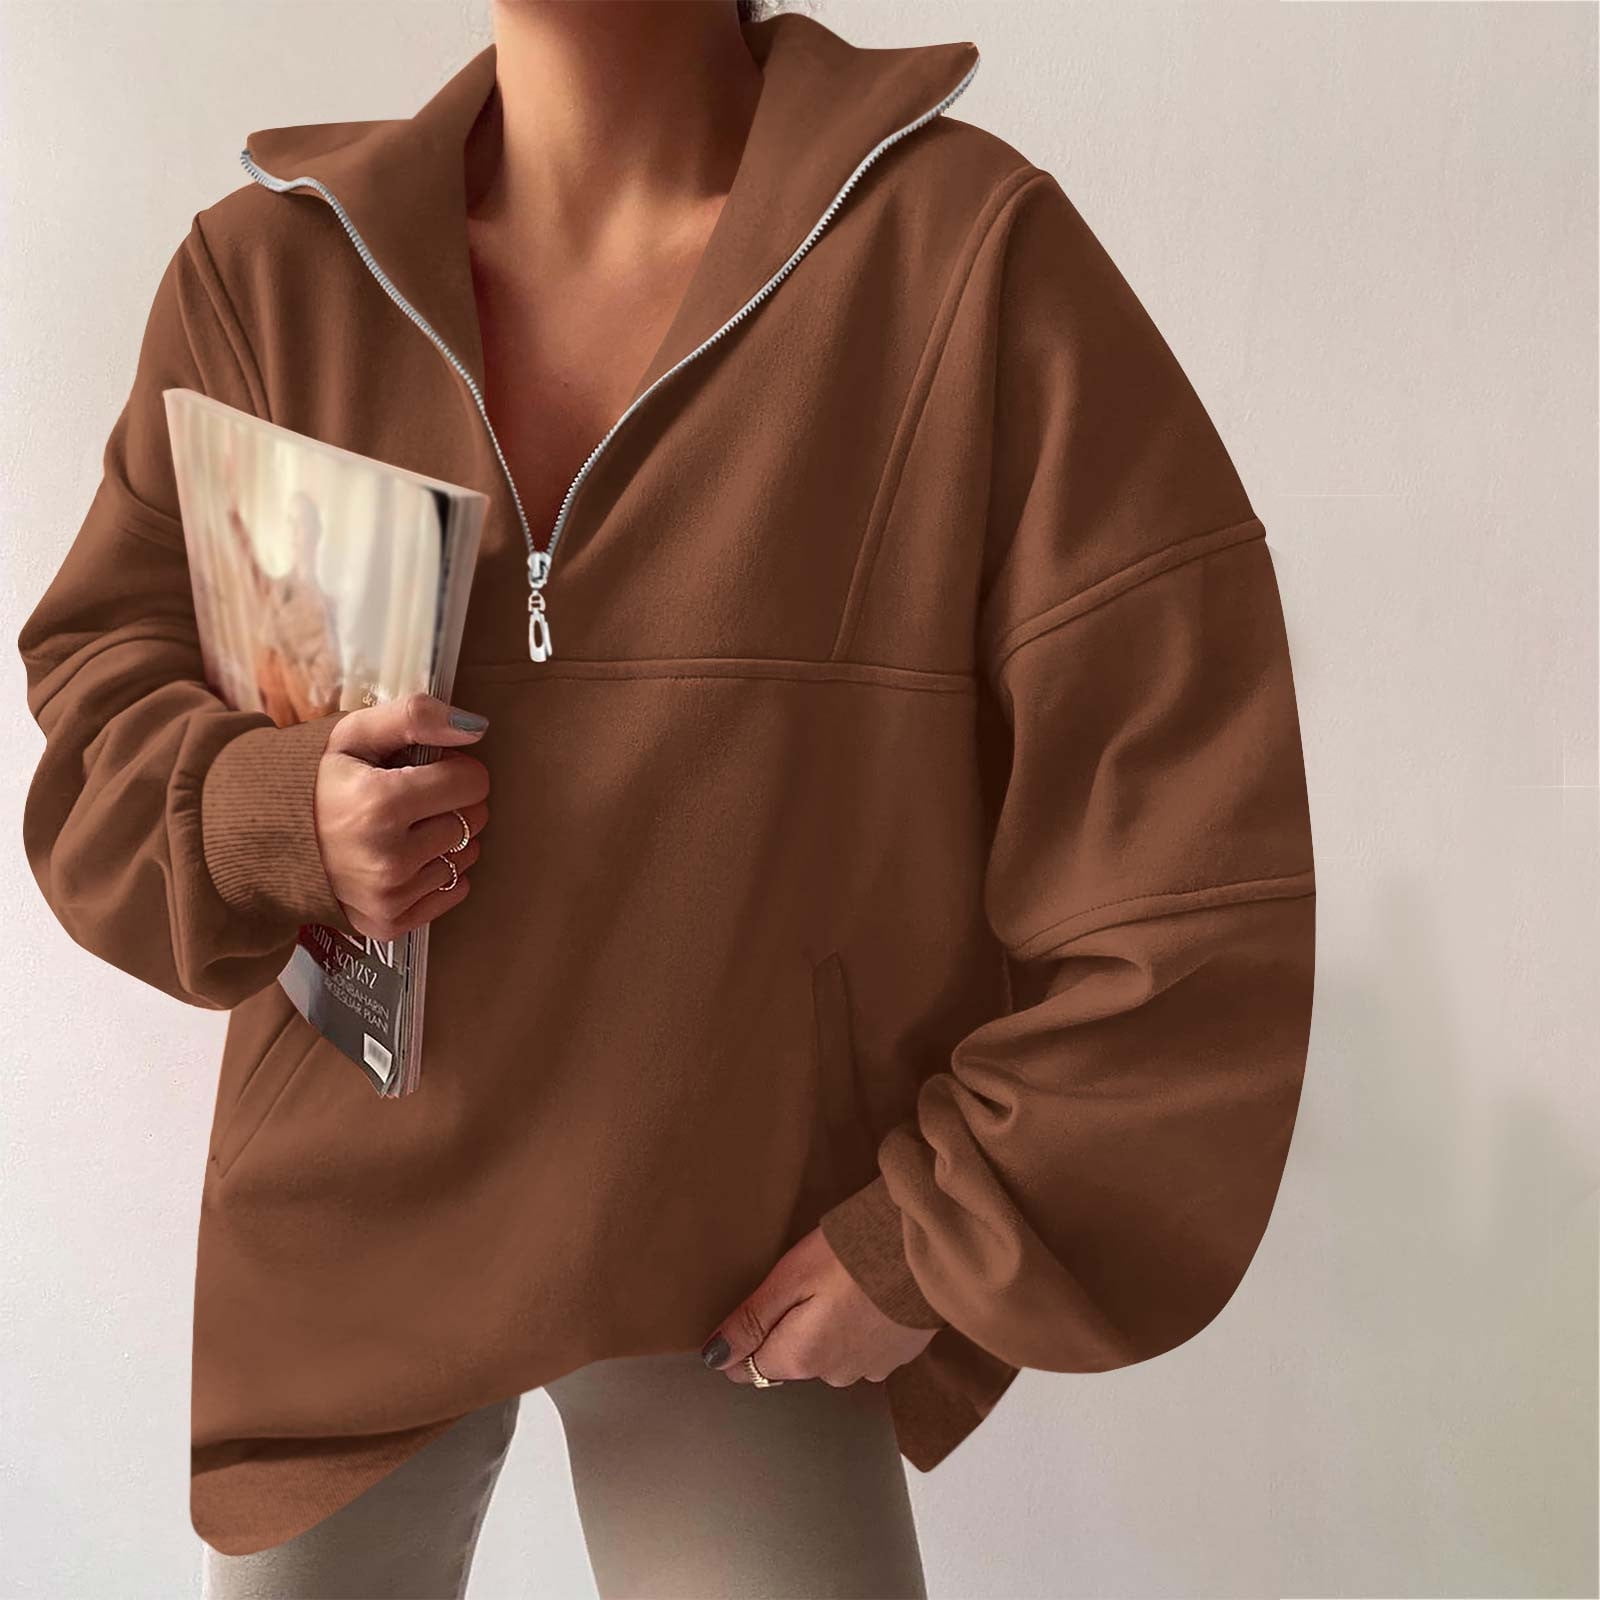 Jacenvly Sweatshirts For Women Clearance Long Sleeve Solid Lapel